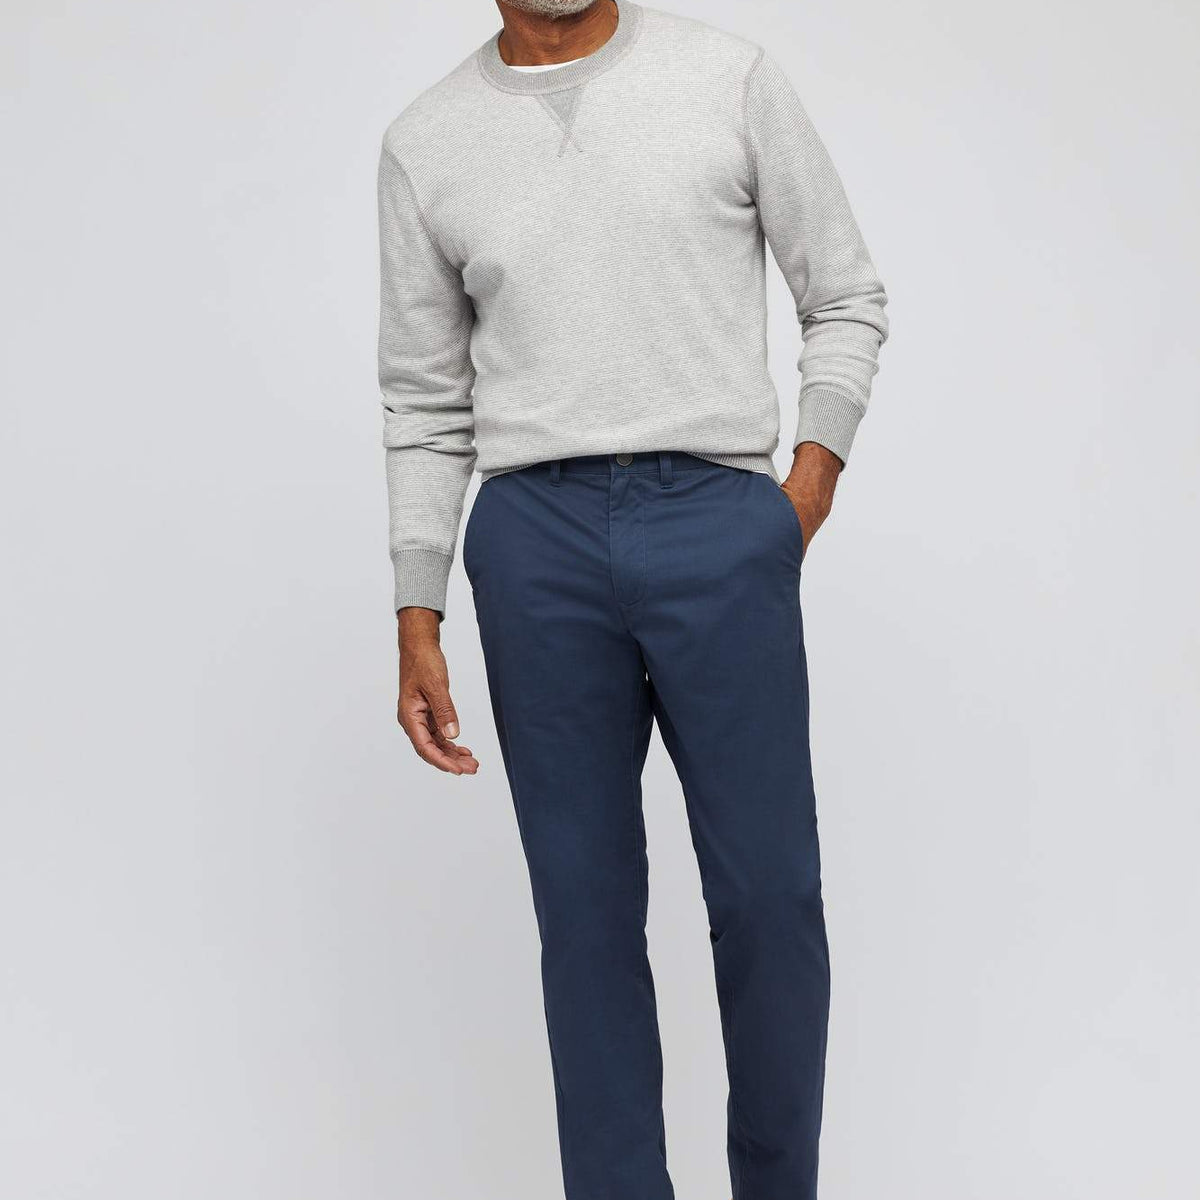 Bonobos Stretch Washed Slim Midnights Chino- After